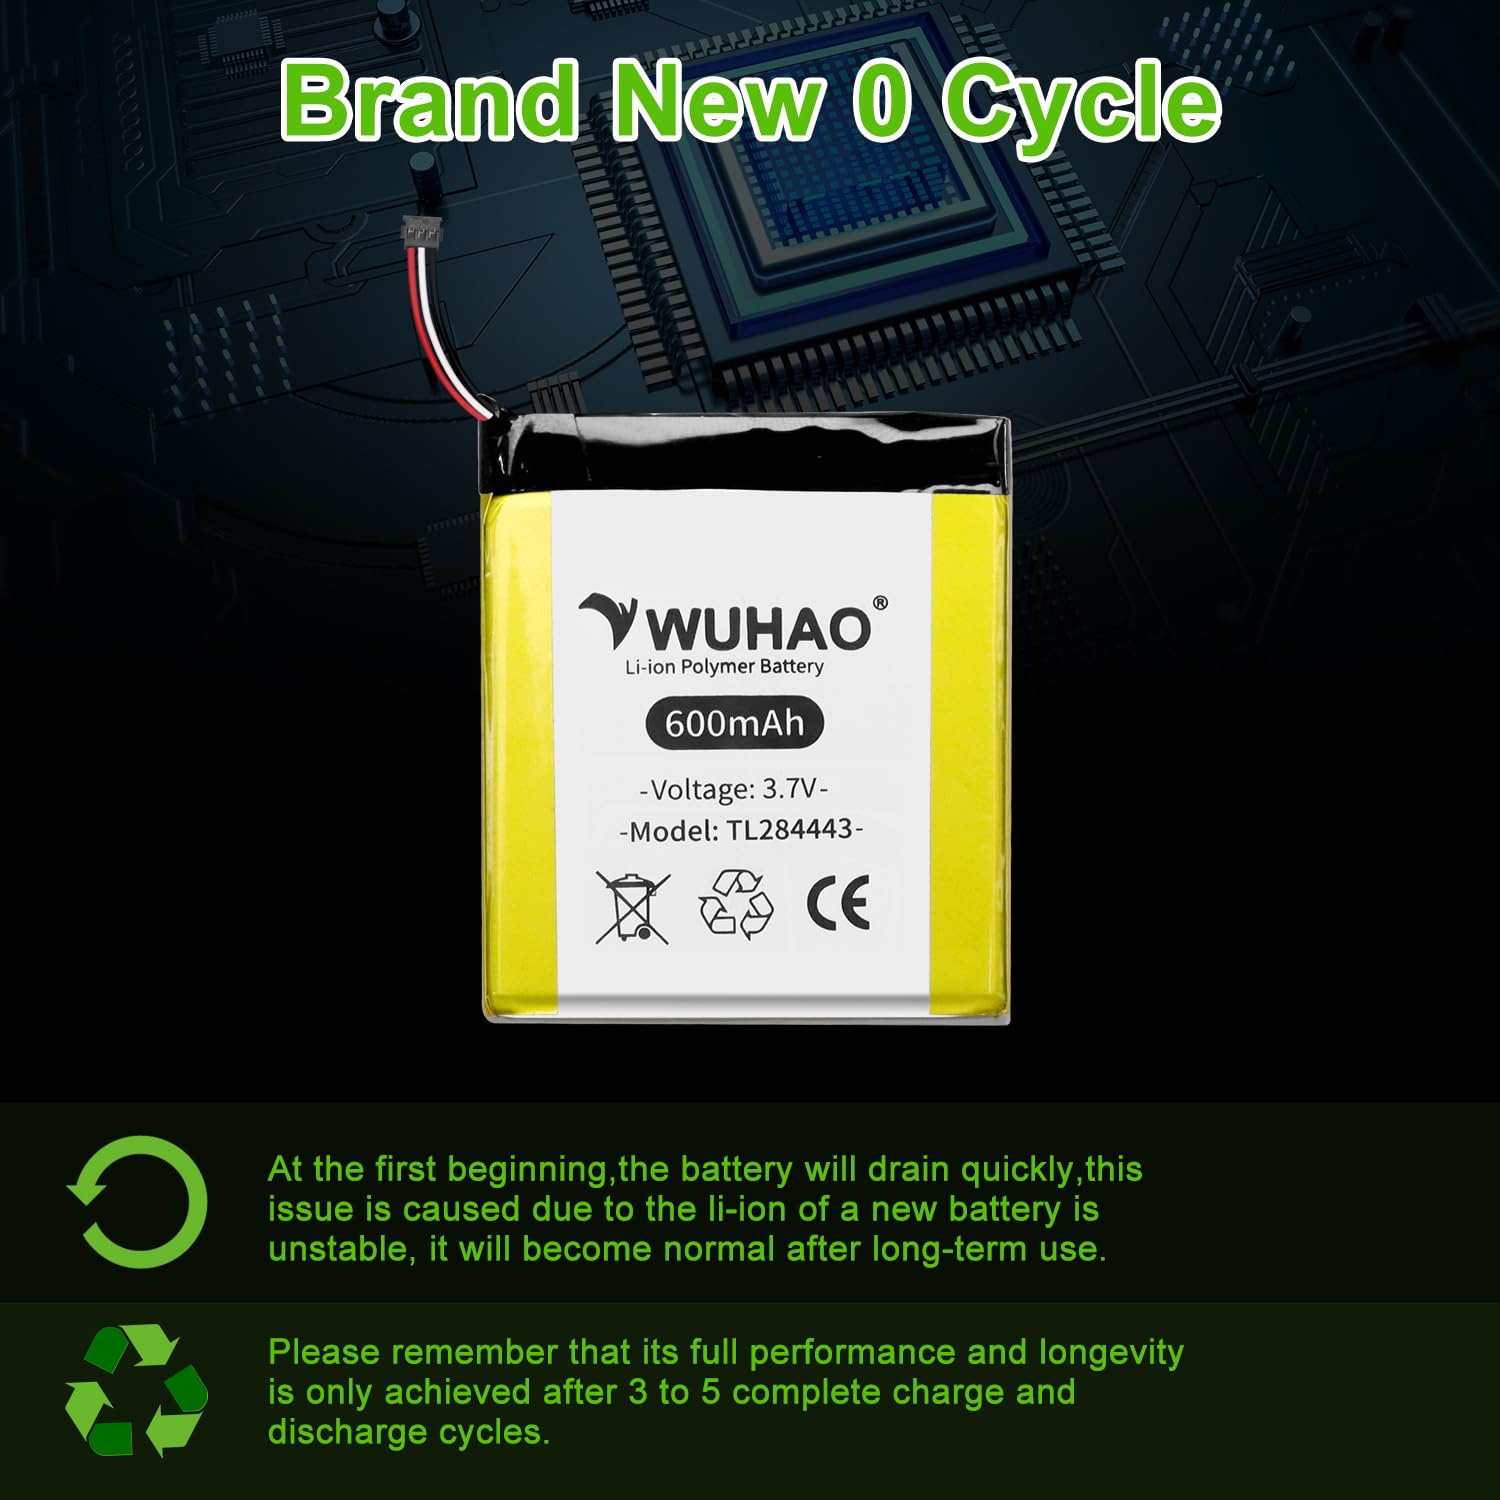 WUHAO TL284443 Battery Upgraded 600mAh for Nest Learning Thermostat 2nd 3rd T3008US T4000ES T3007ES A0013 Replacement Battery 3.7V with Tool Kit